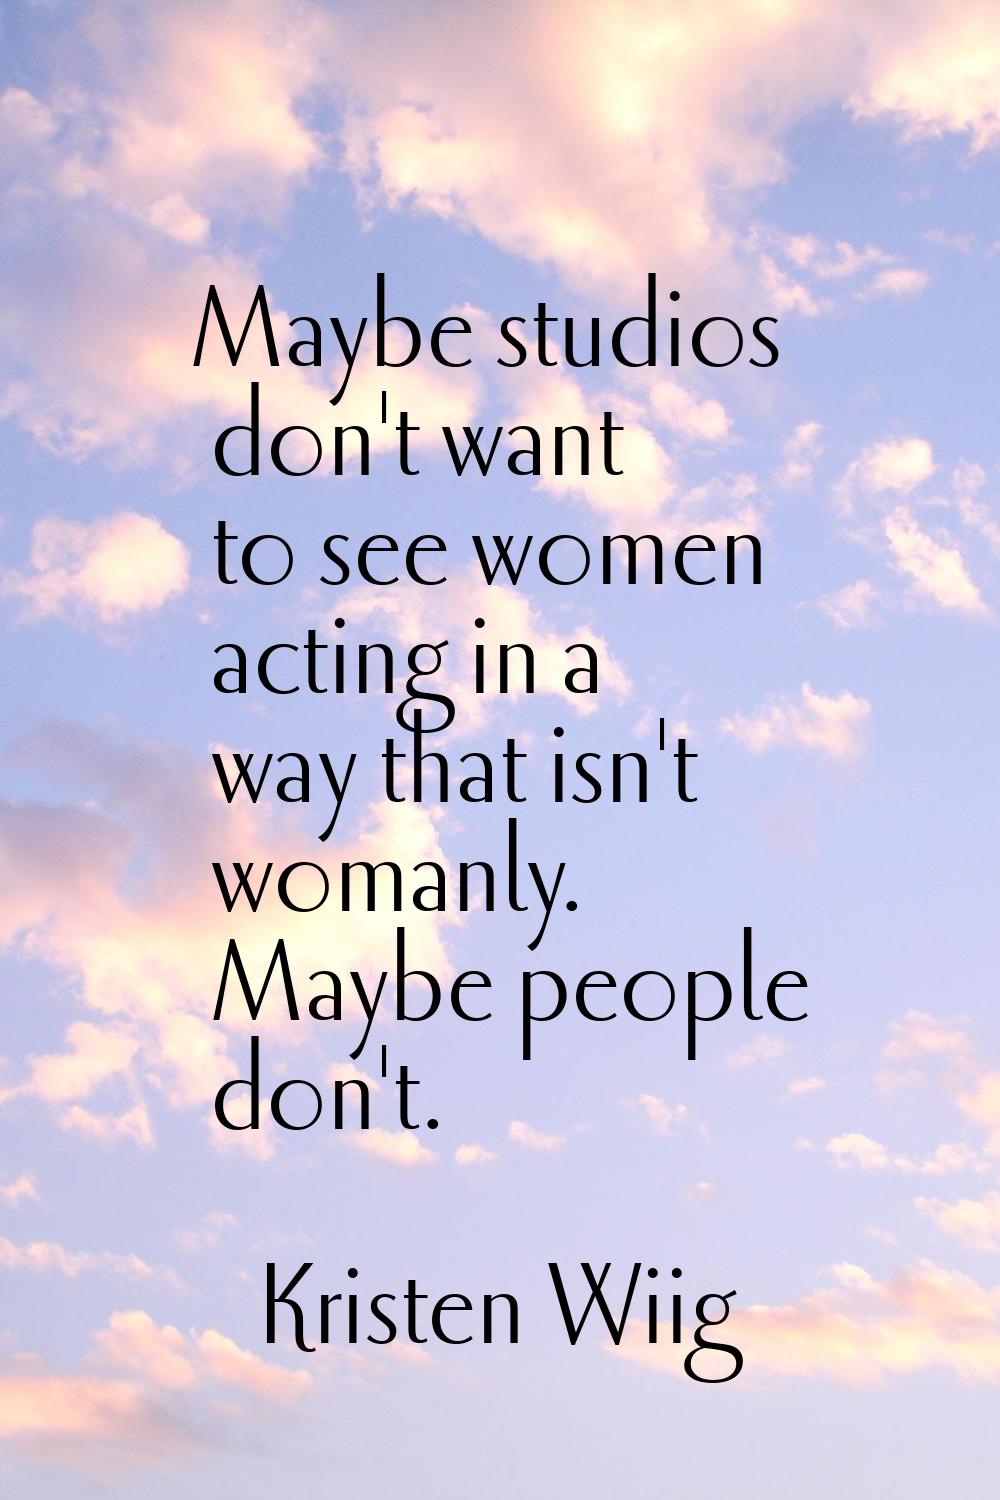 Maybe studios don't want to see women acting in a way that isn't womanly. Maybe people don't.